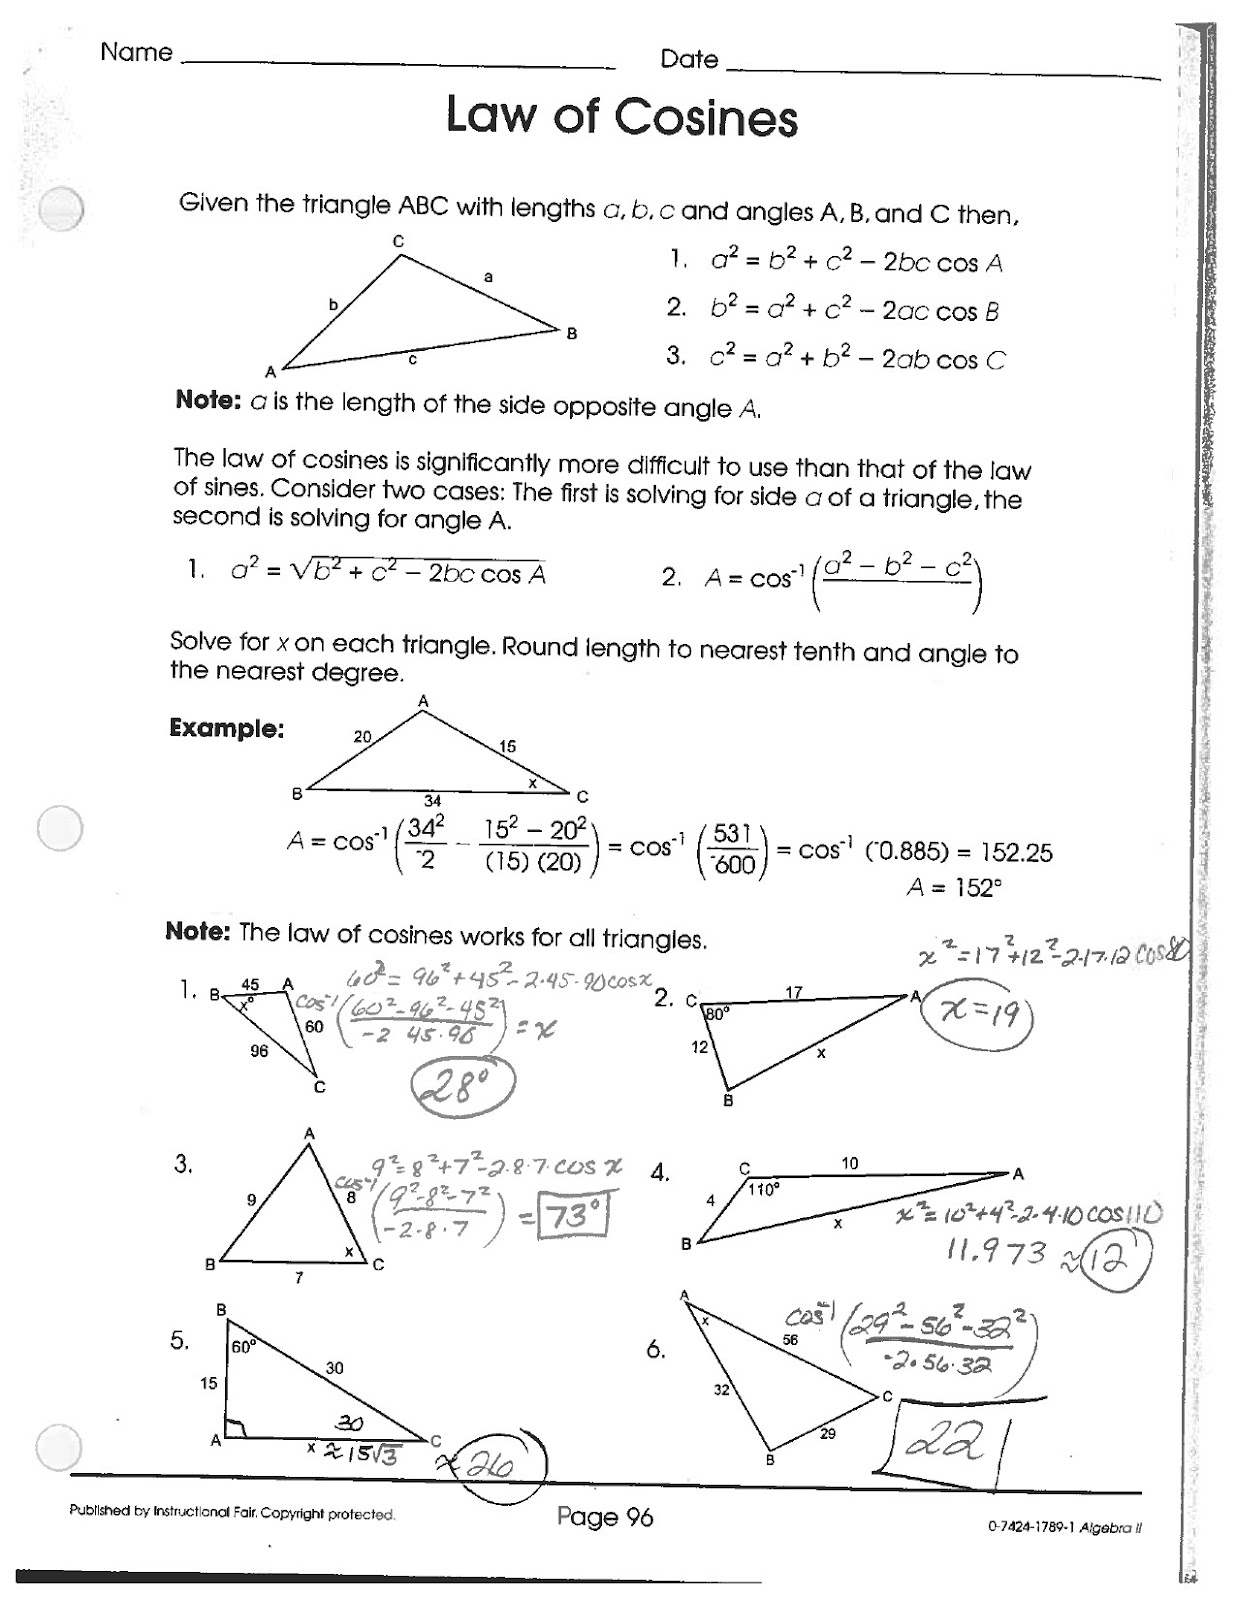 glencoe mathematics geometry worksheets parallel lines cut by a